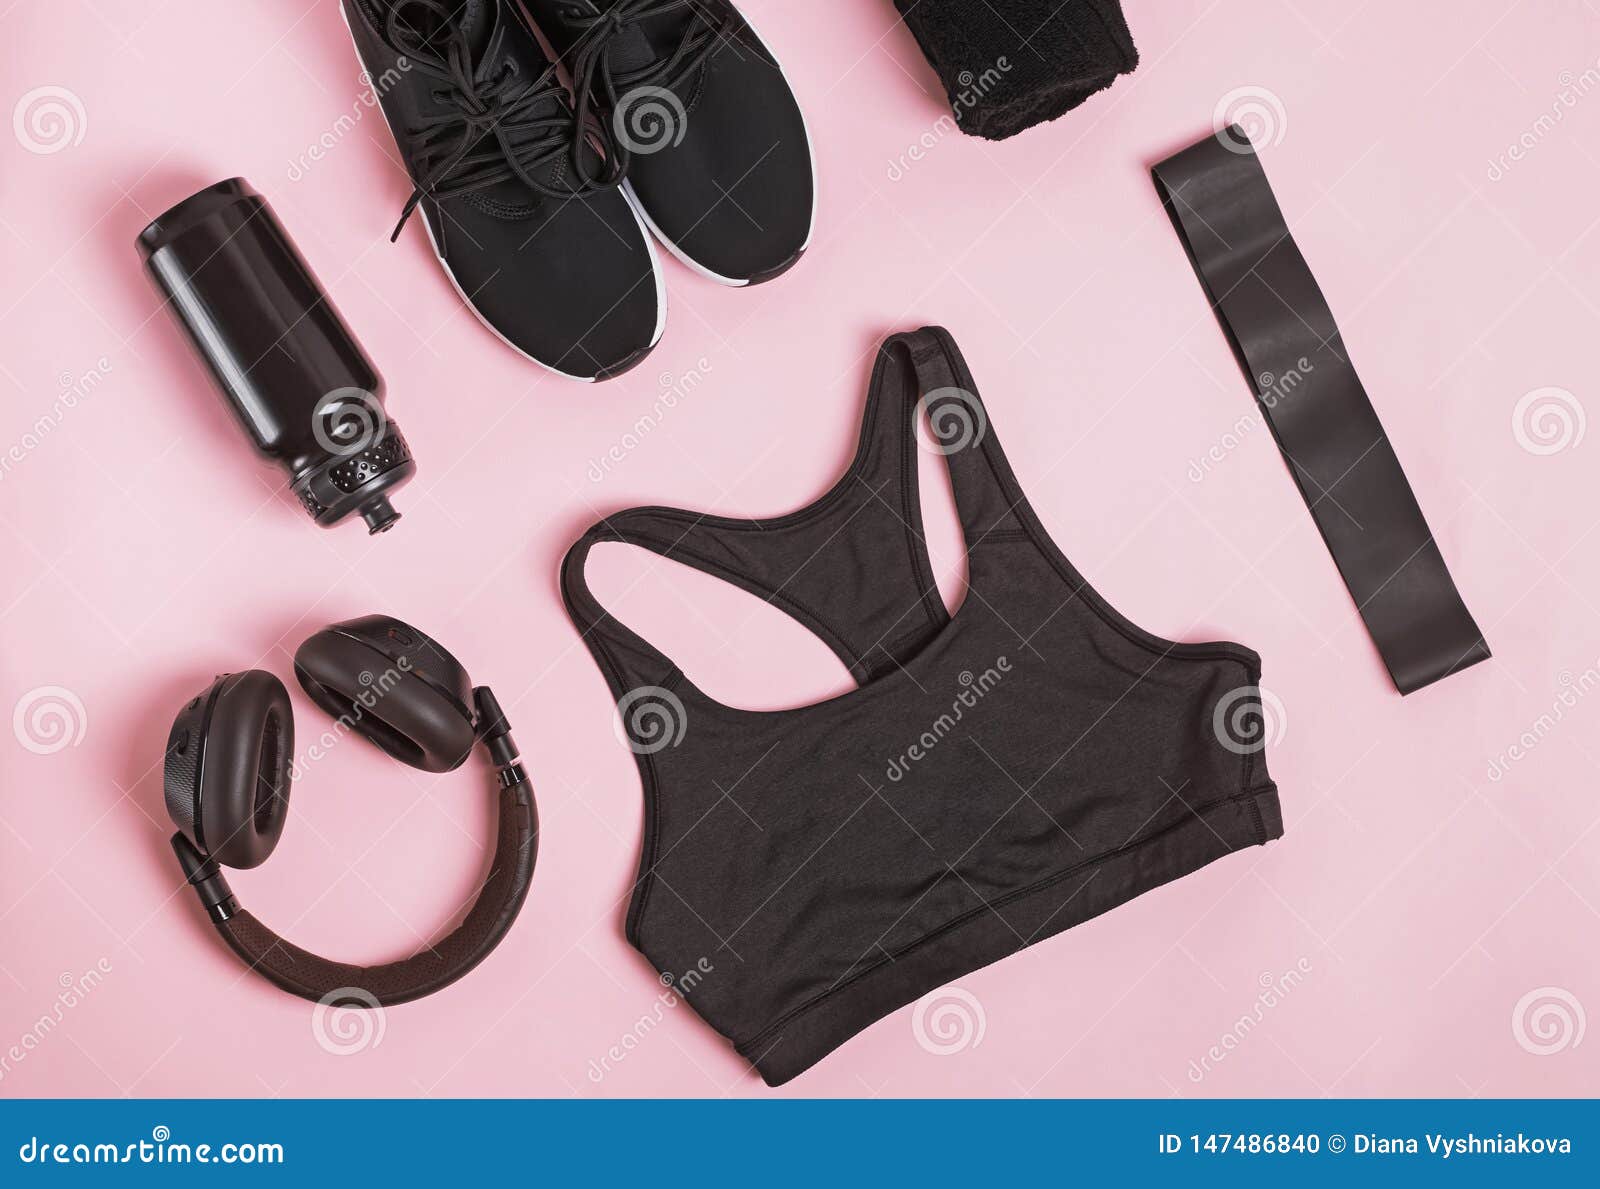 Fitness Sports Equipment And Accessories On Pink Background, Flat